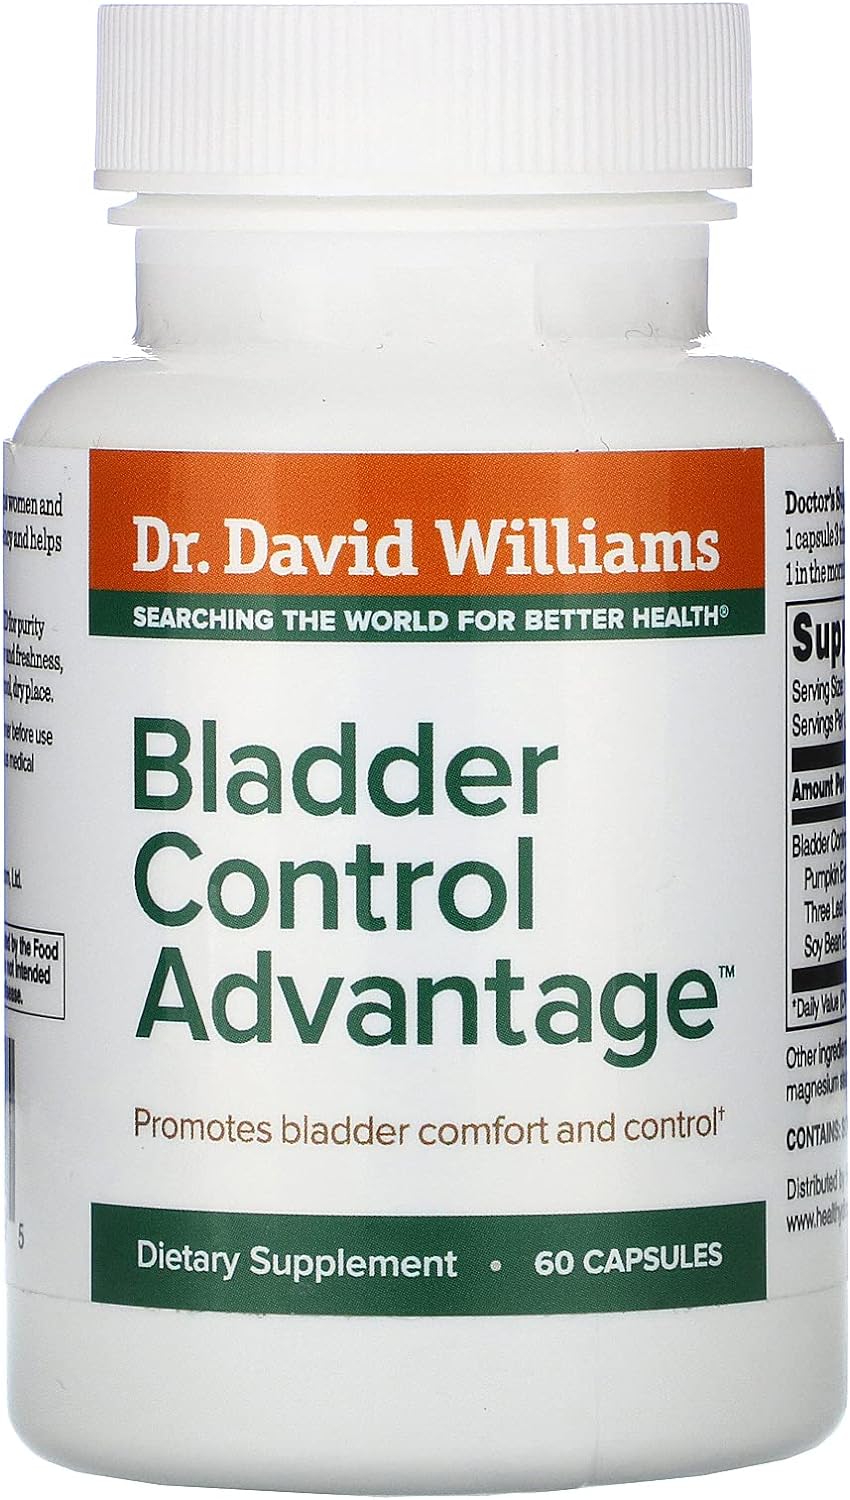 Dr. David Williams' Bladder Control Advantage Supplement with Clinically-Validated Go-Less for Urinary Continence, 60 Capsules : Health & Household